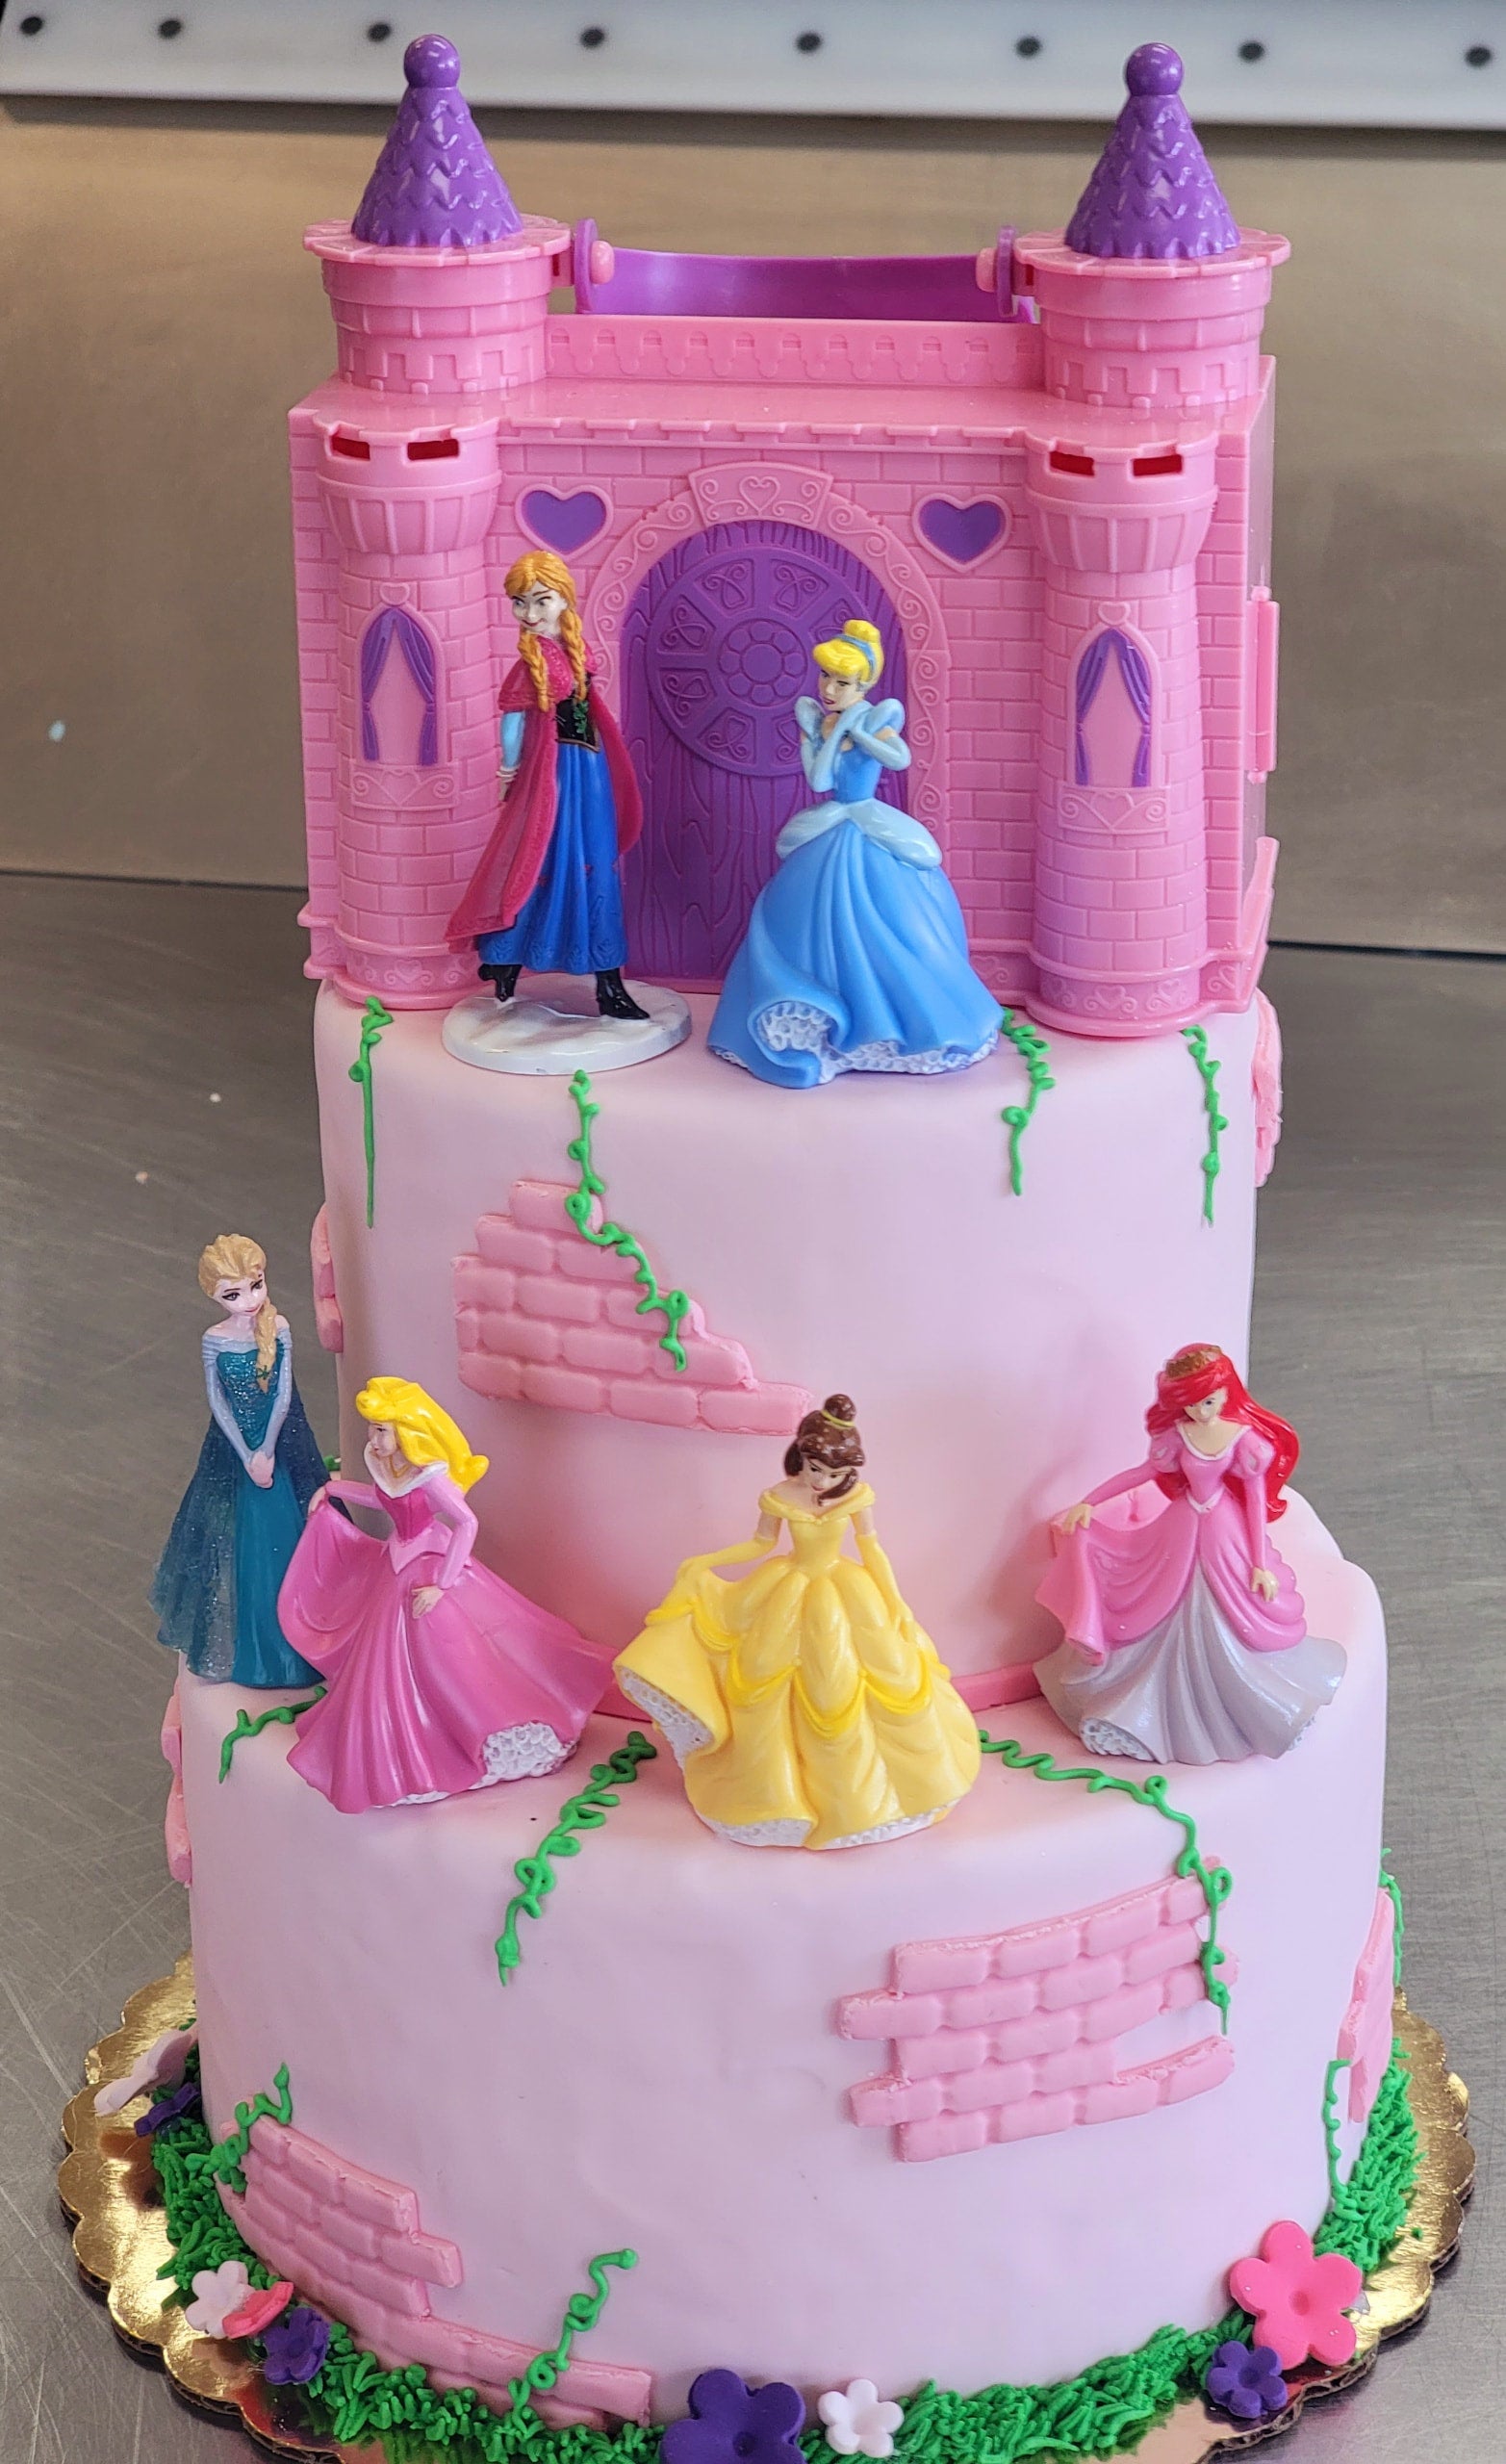 Pretty 3 tiered Princess Cake - Decorated Cake by The - CakesDecor